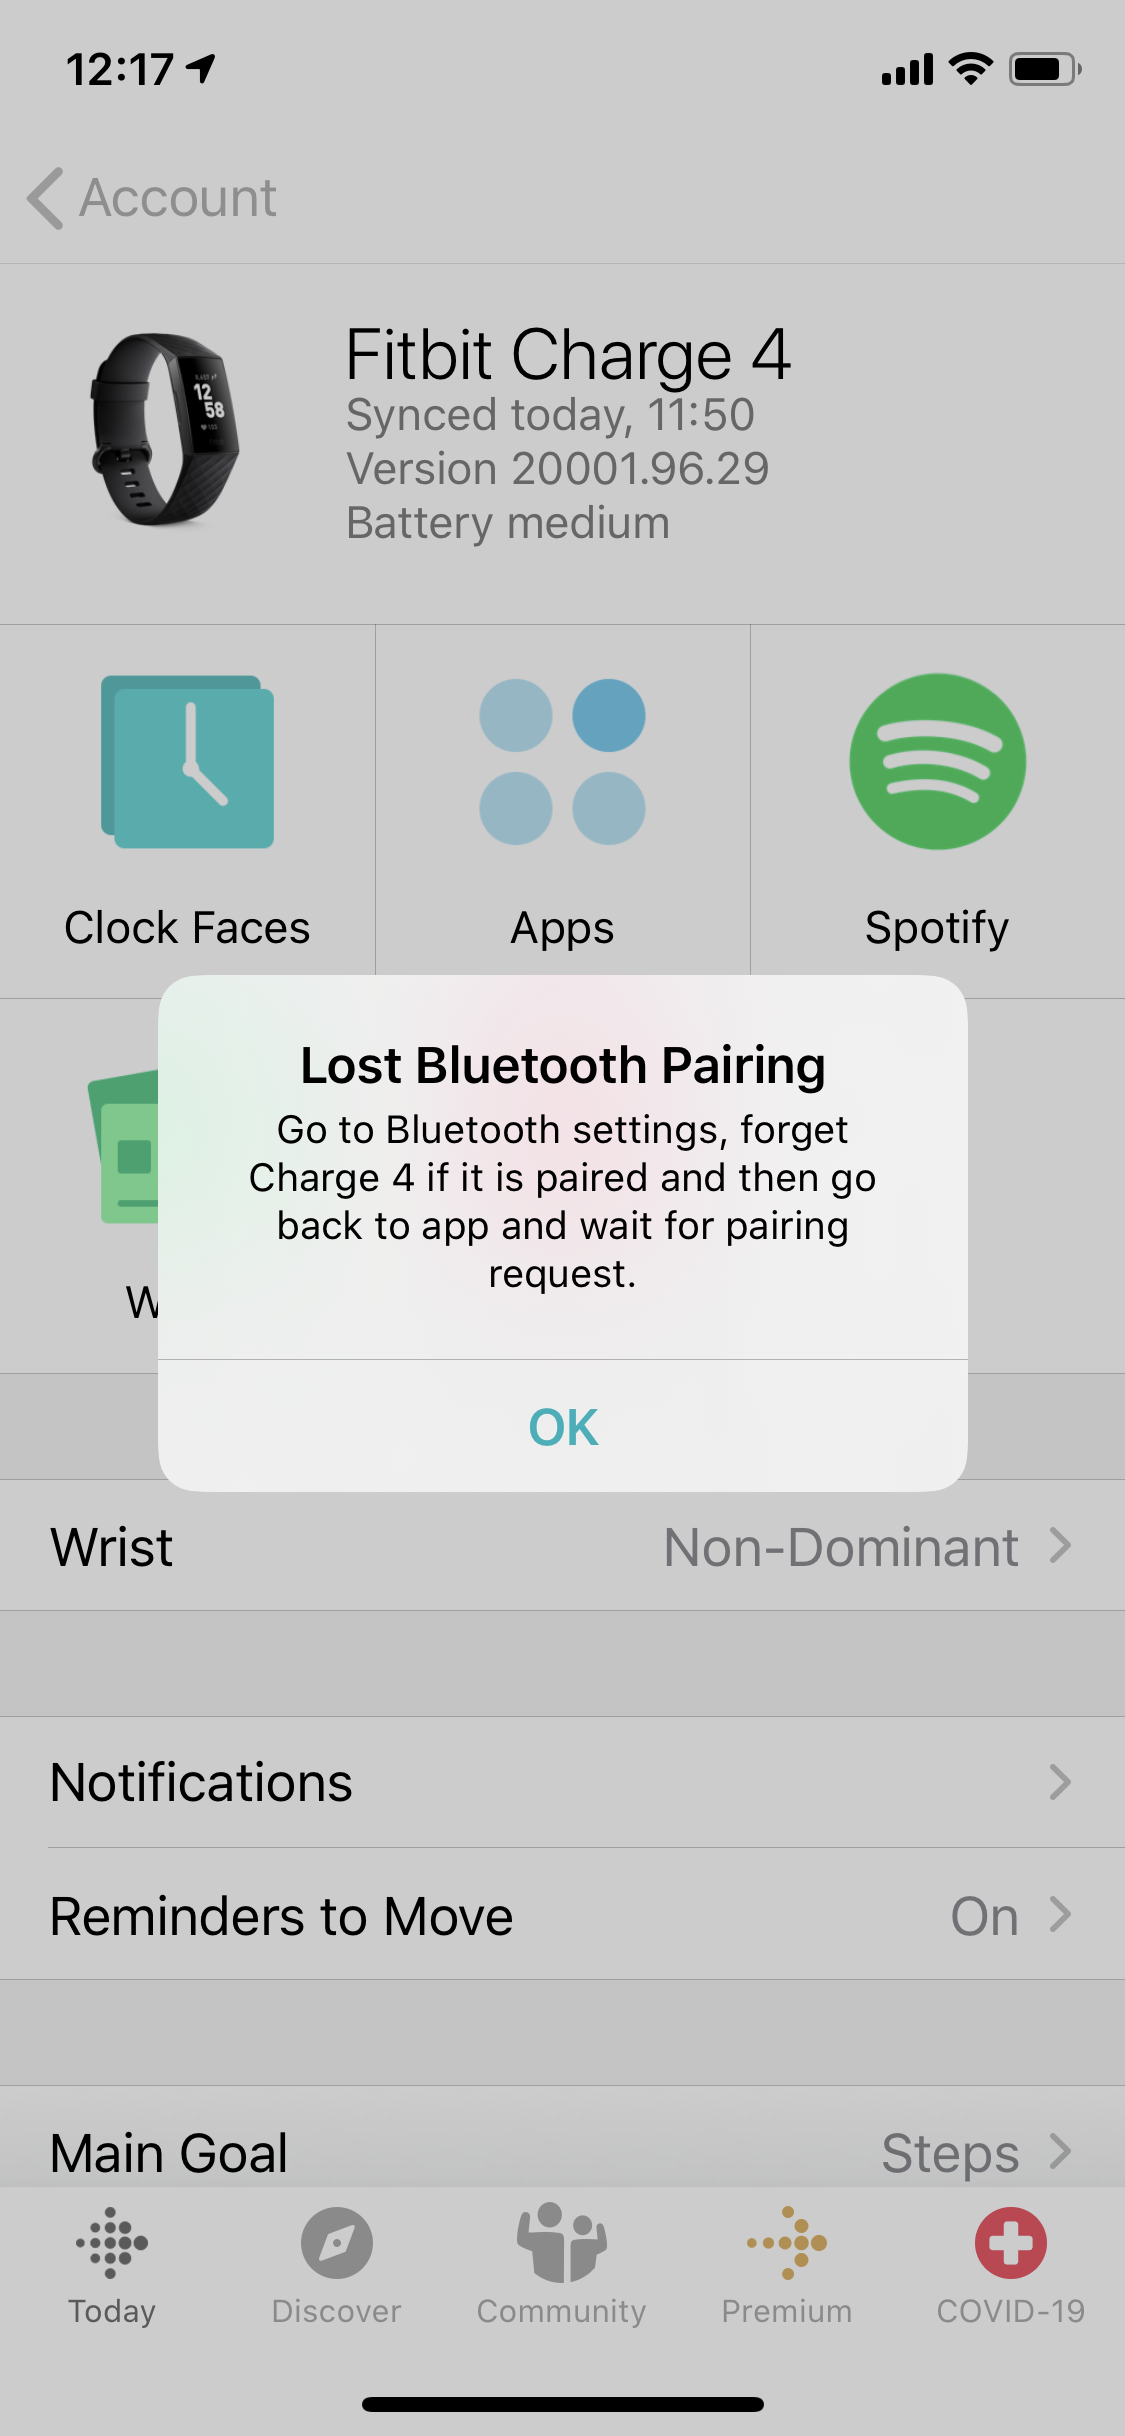 fitbit charge 4 sync to iphone